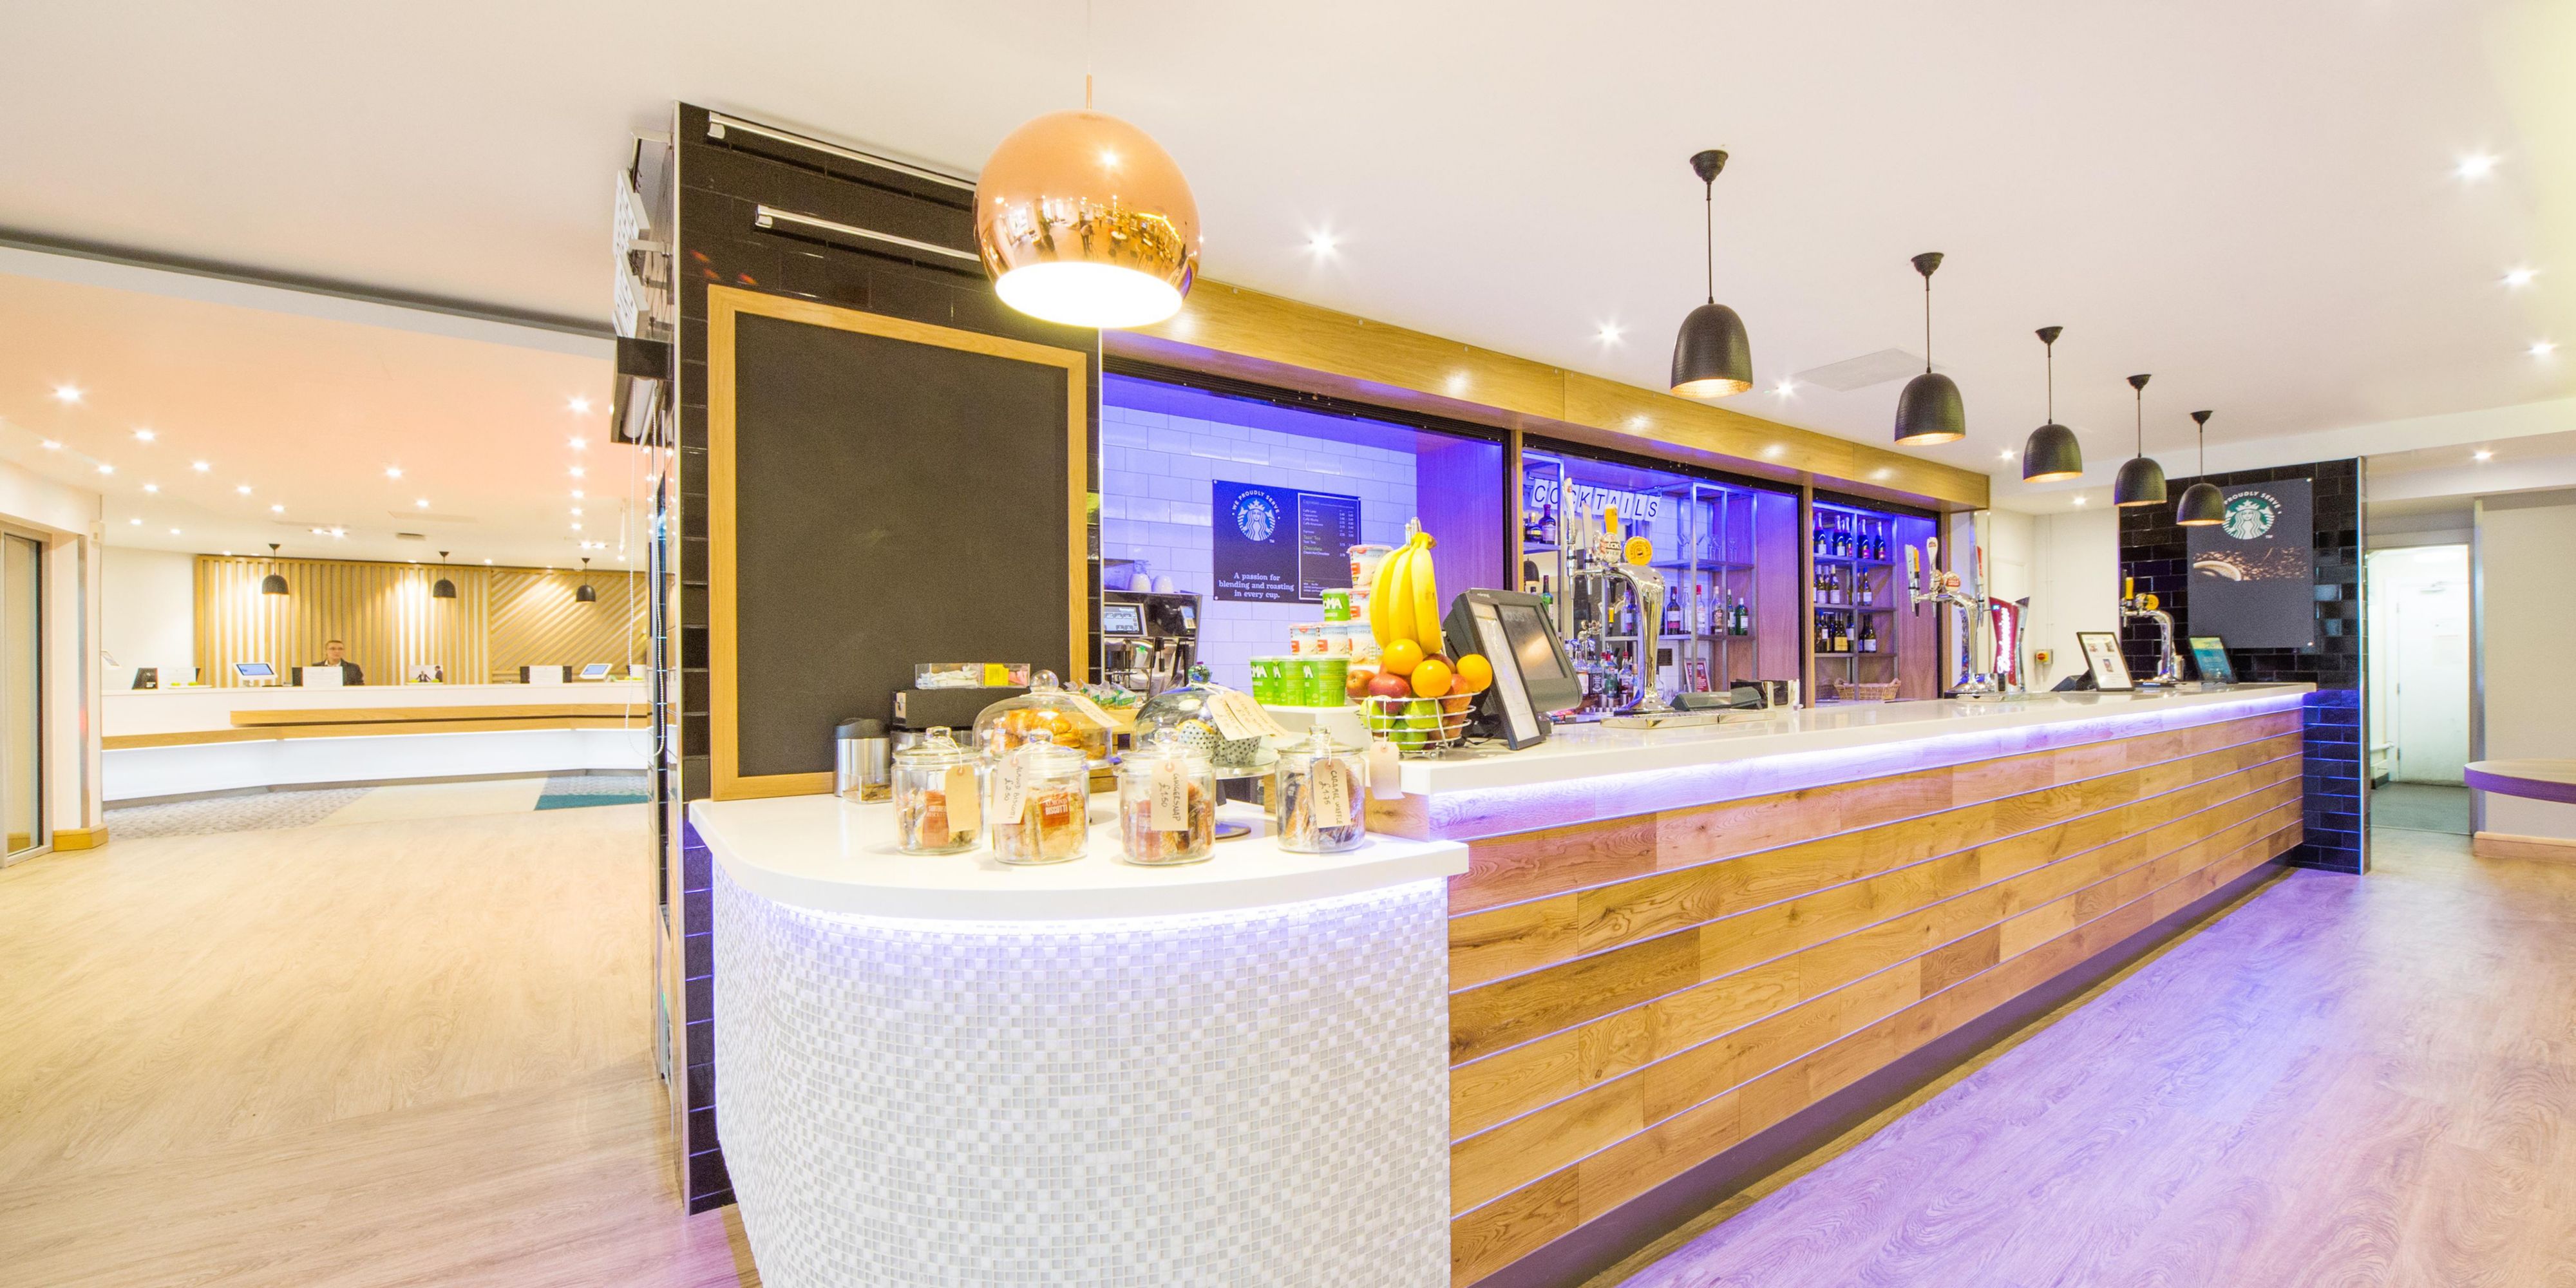 Enjoy a drink from our hotel bar